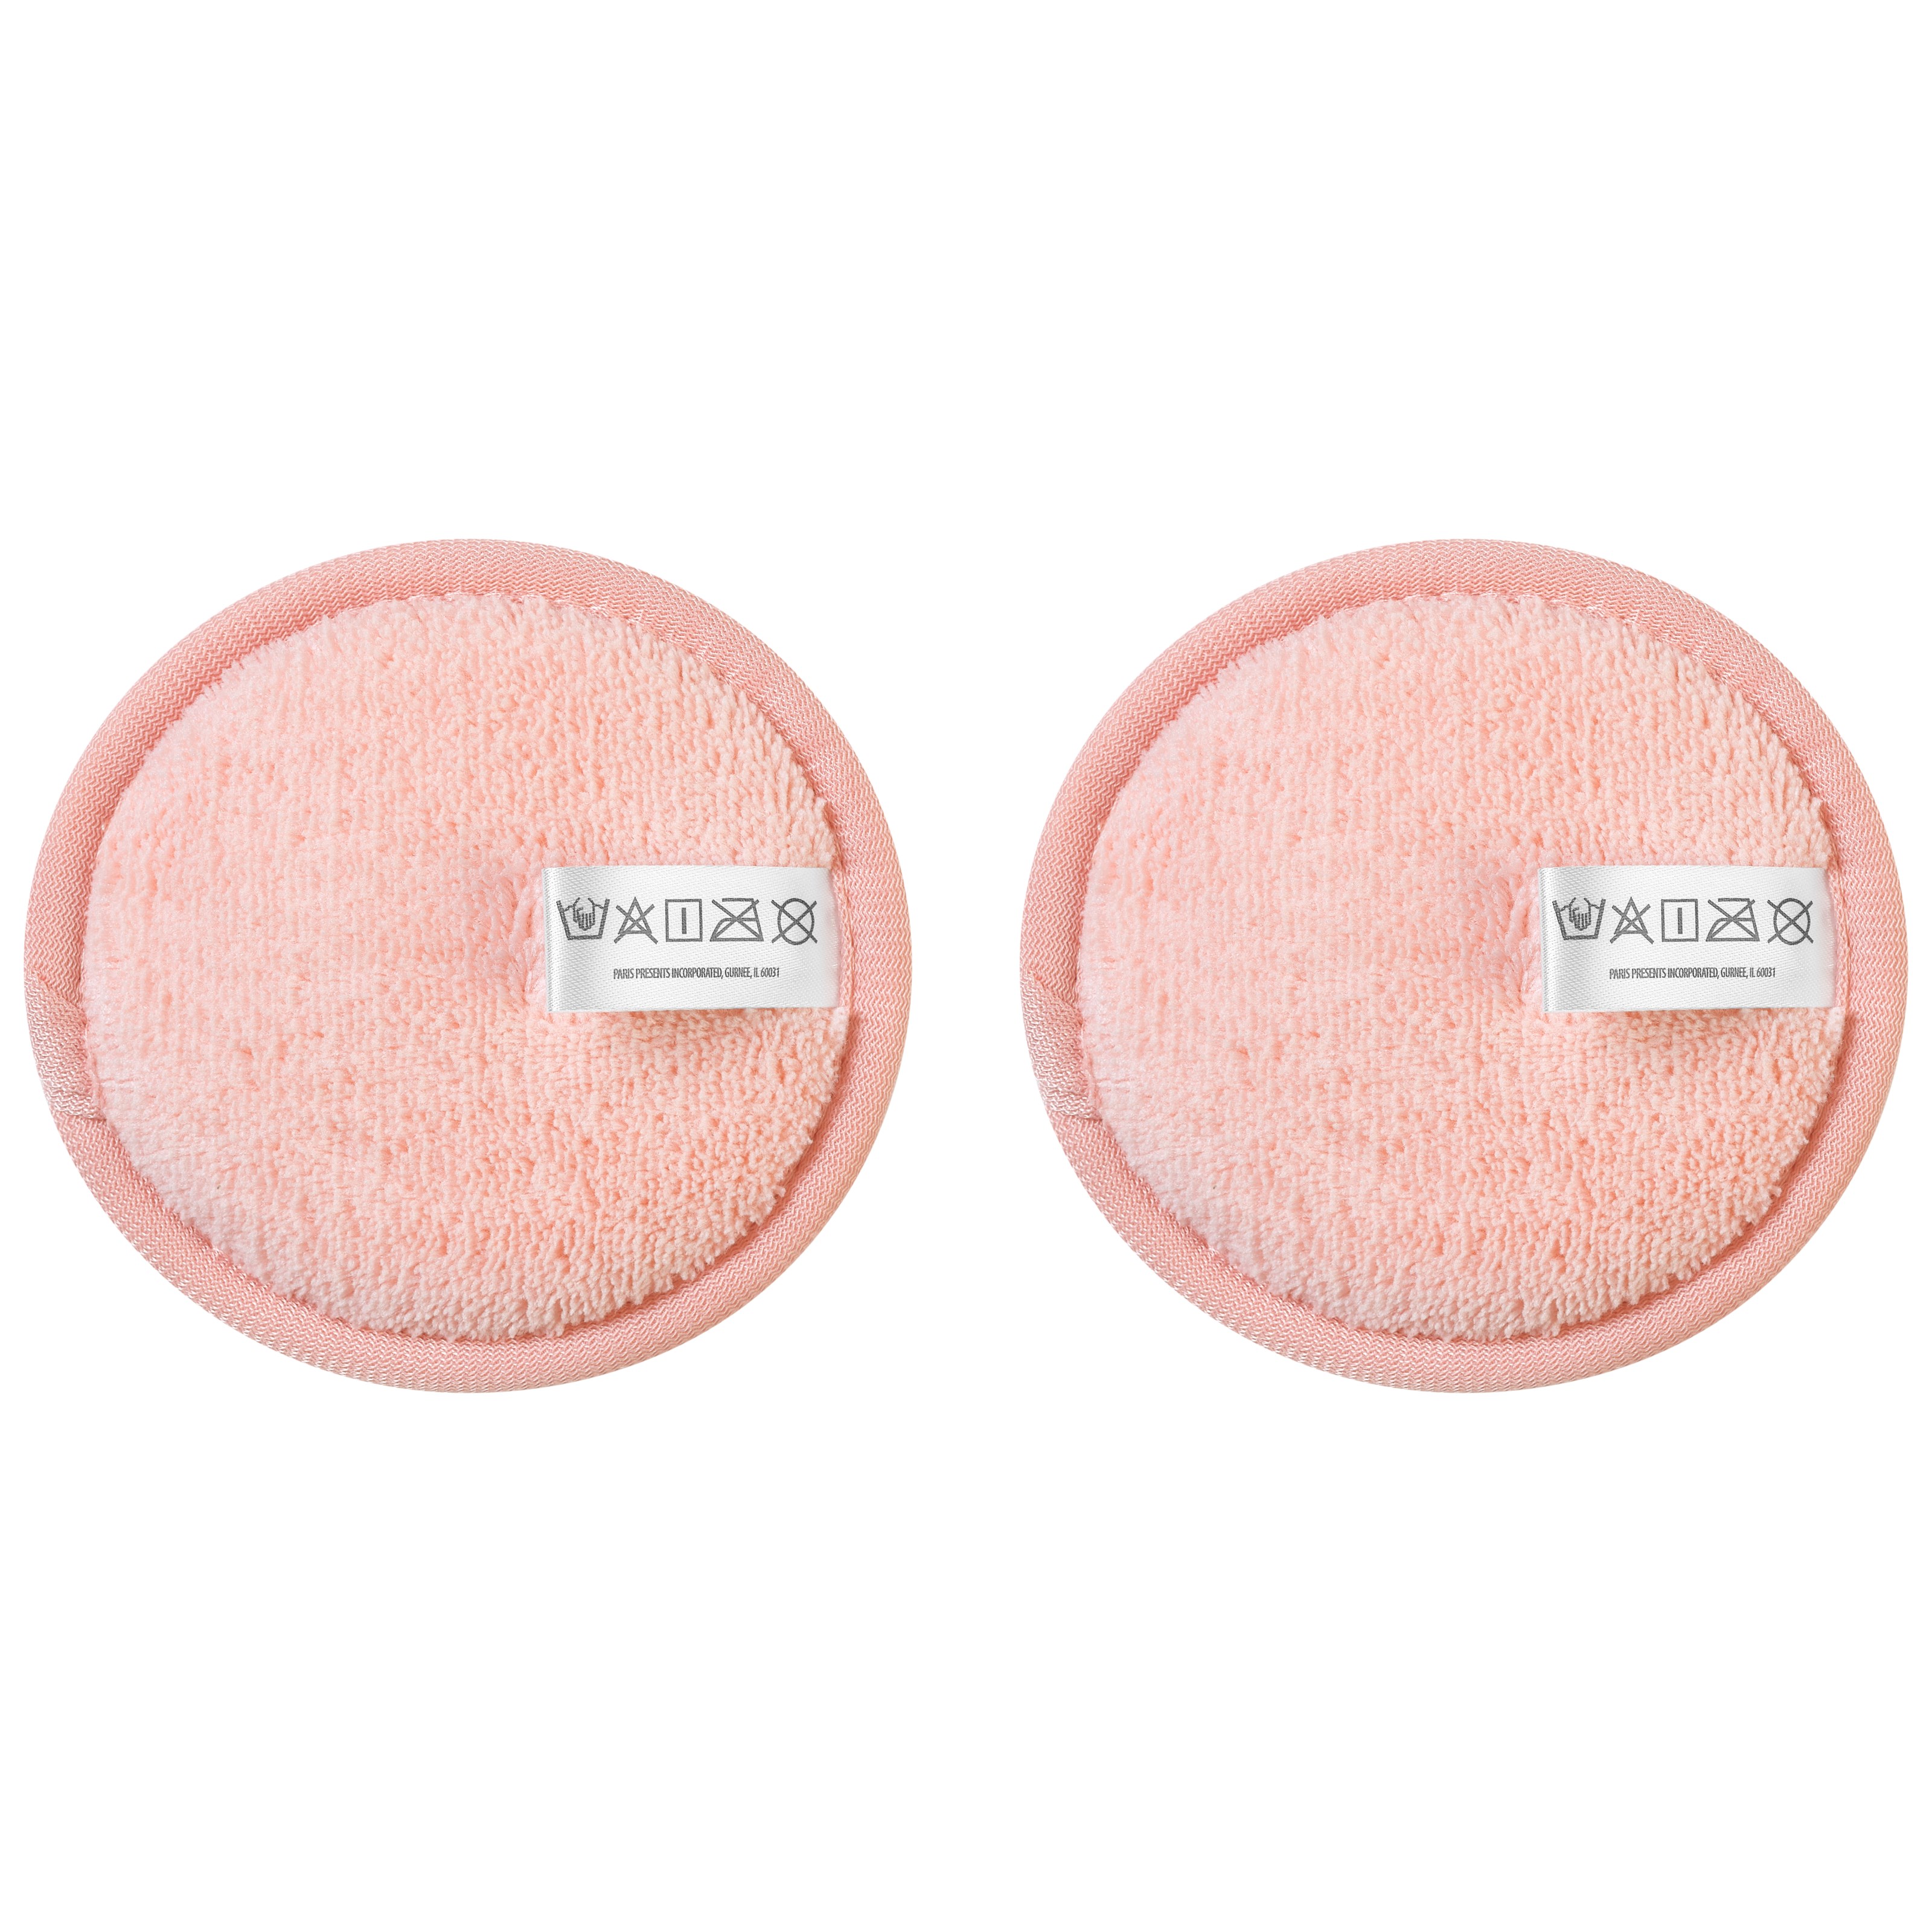 Läs mer om Real Techniques Makeup Remover Pads